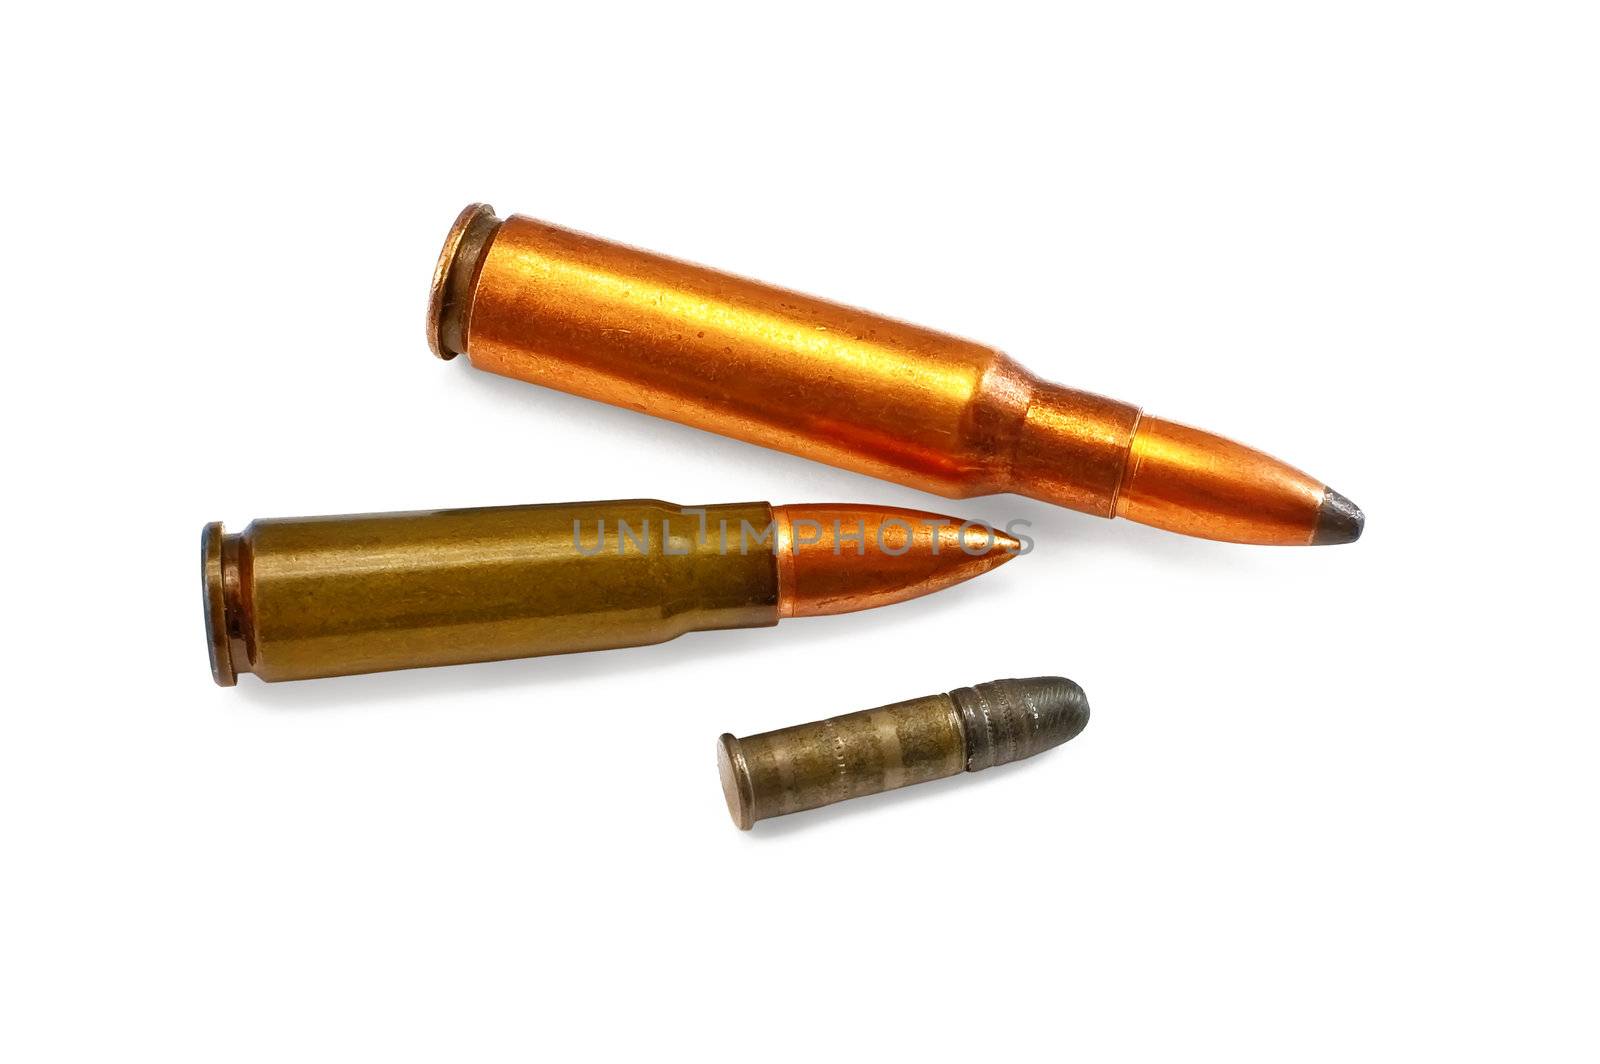 Two cartridges for the automatic weapons and one for small-bore rifle isolated on a white background